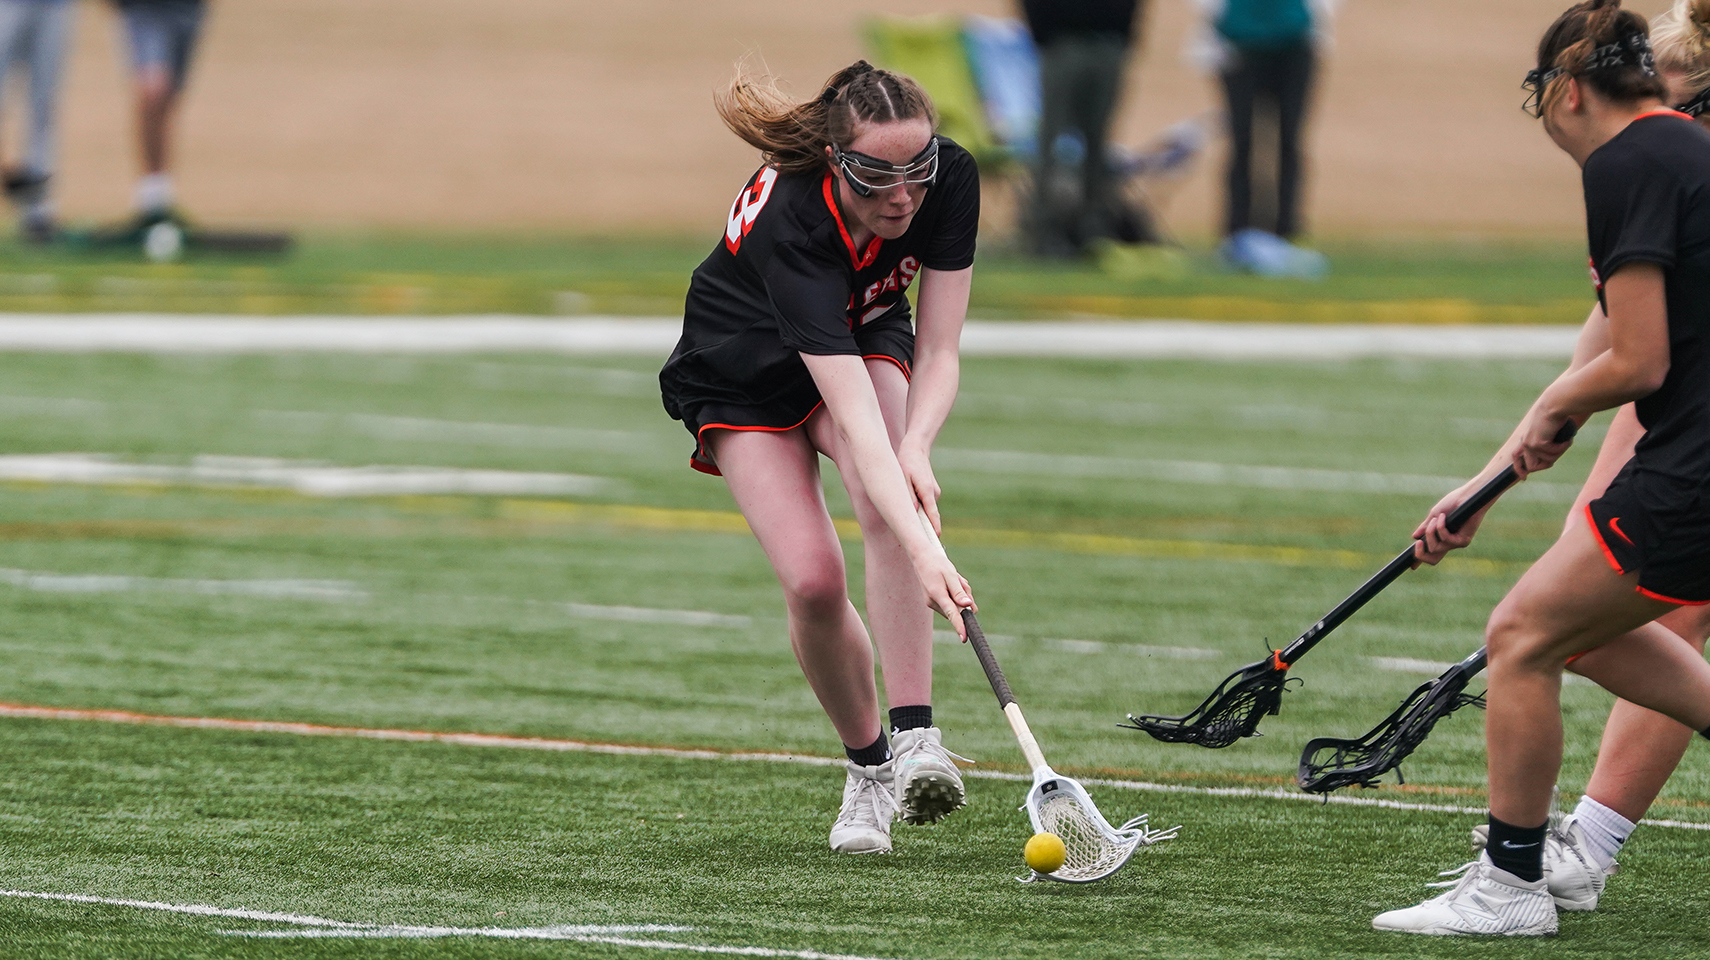 women's lacrosse player picking up a ground ball